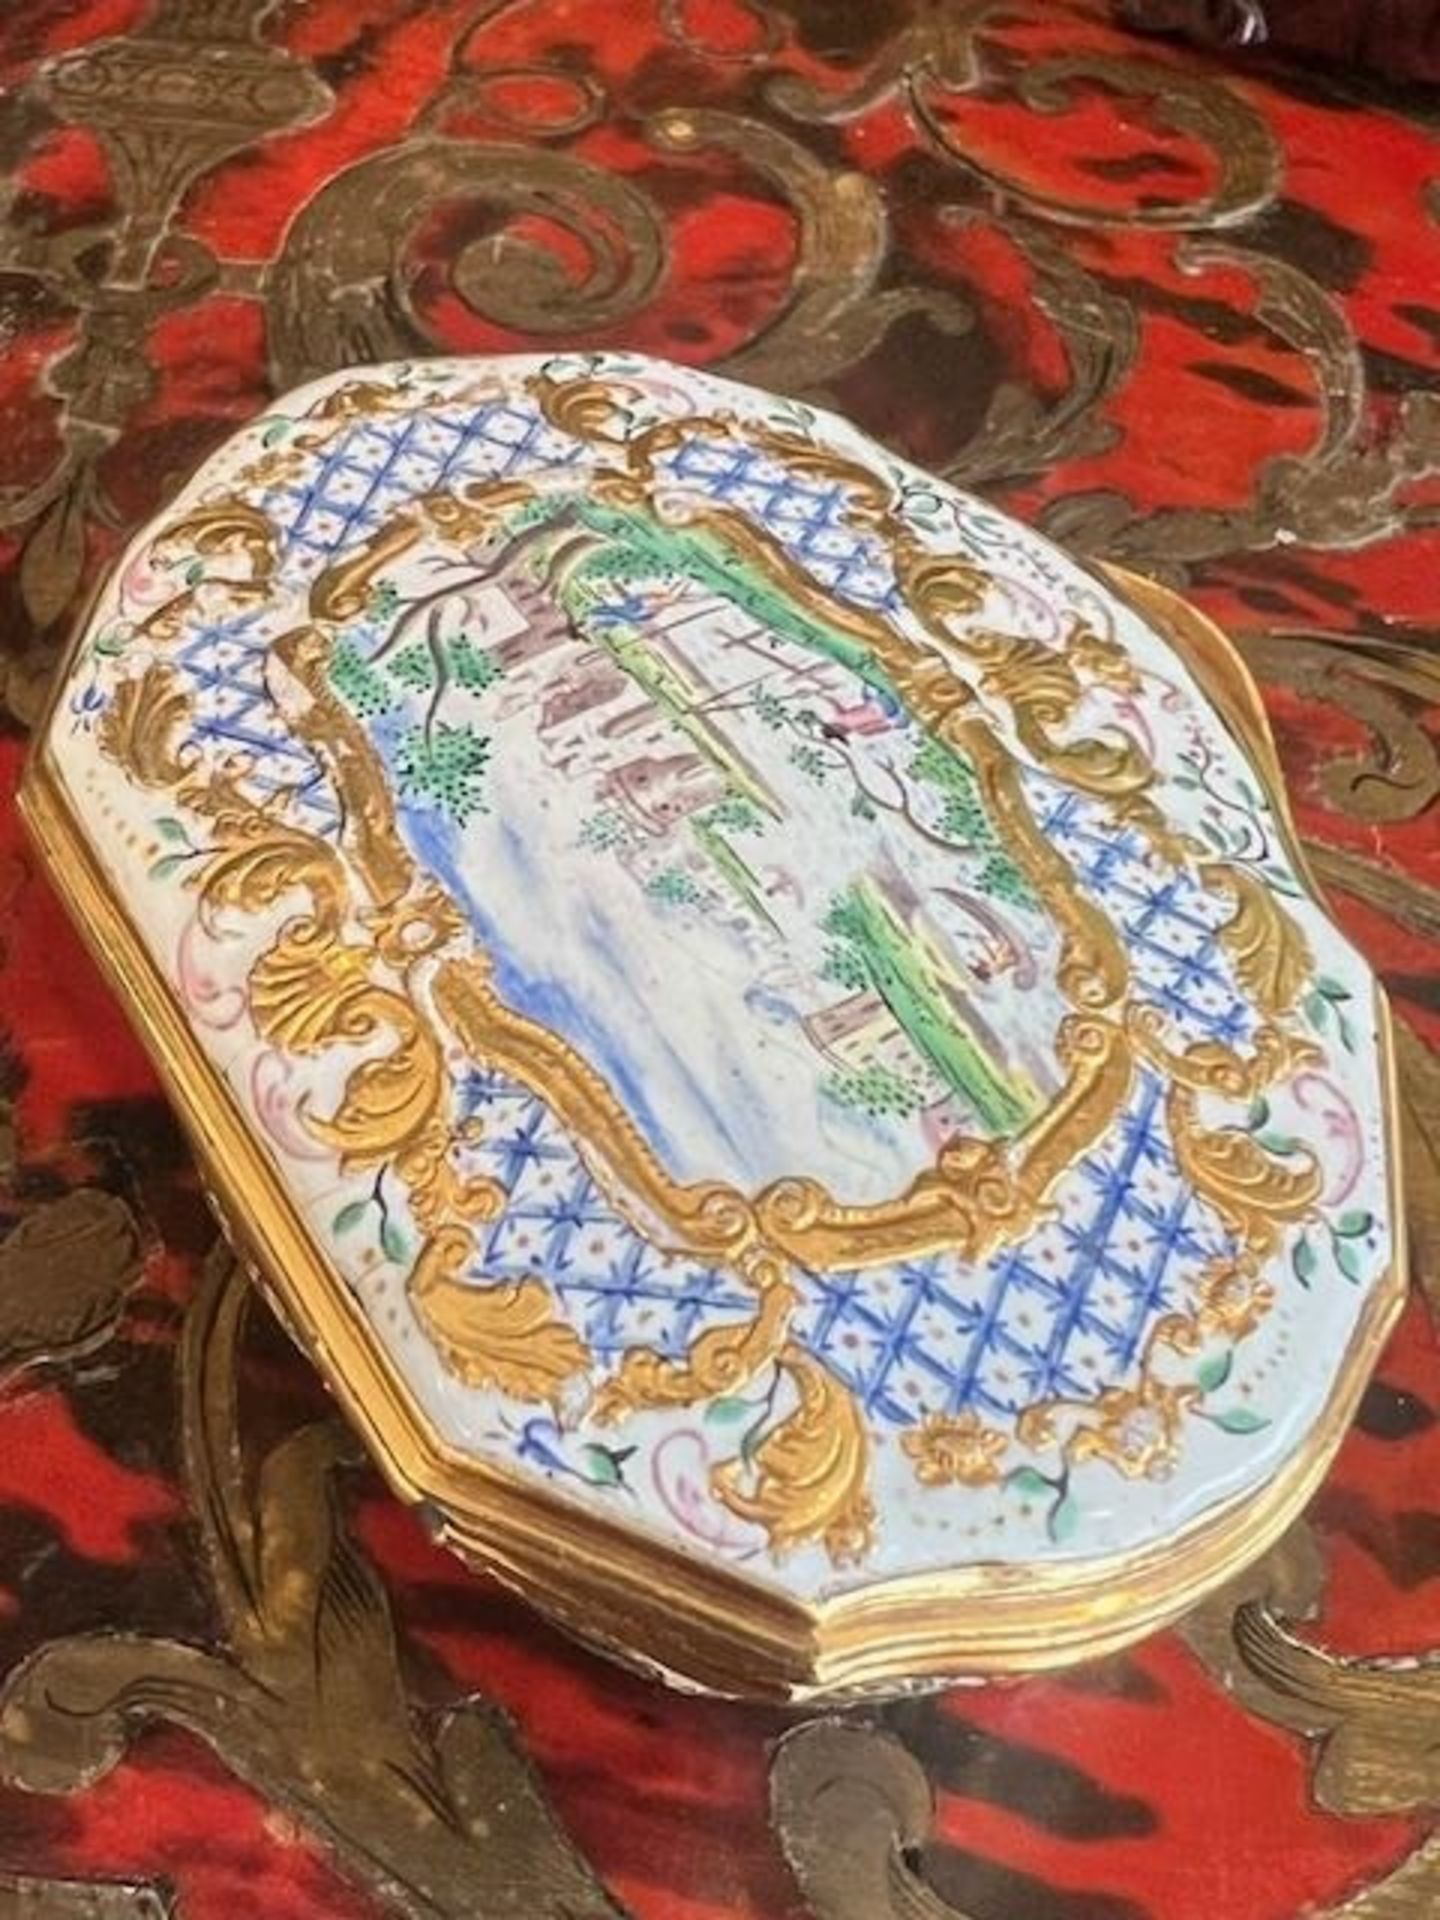 A MID 18TH CENTURY GERMAN SILVER GILT, GOLD MOUNTED AND ENAMELLED SNUFF BOX